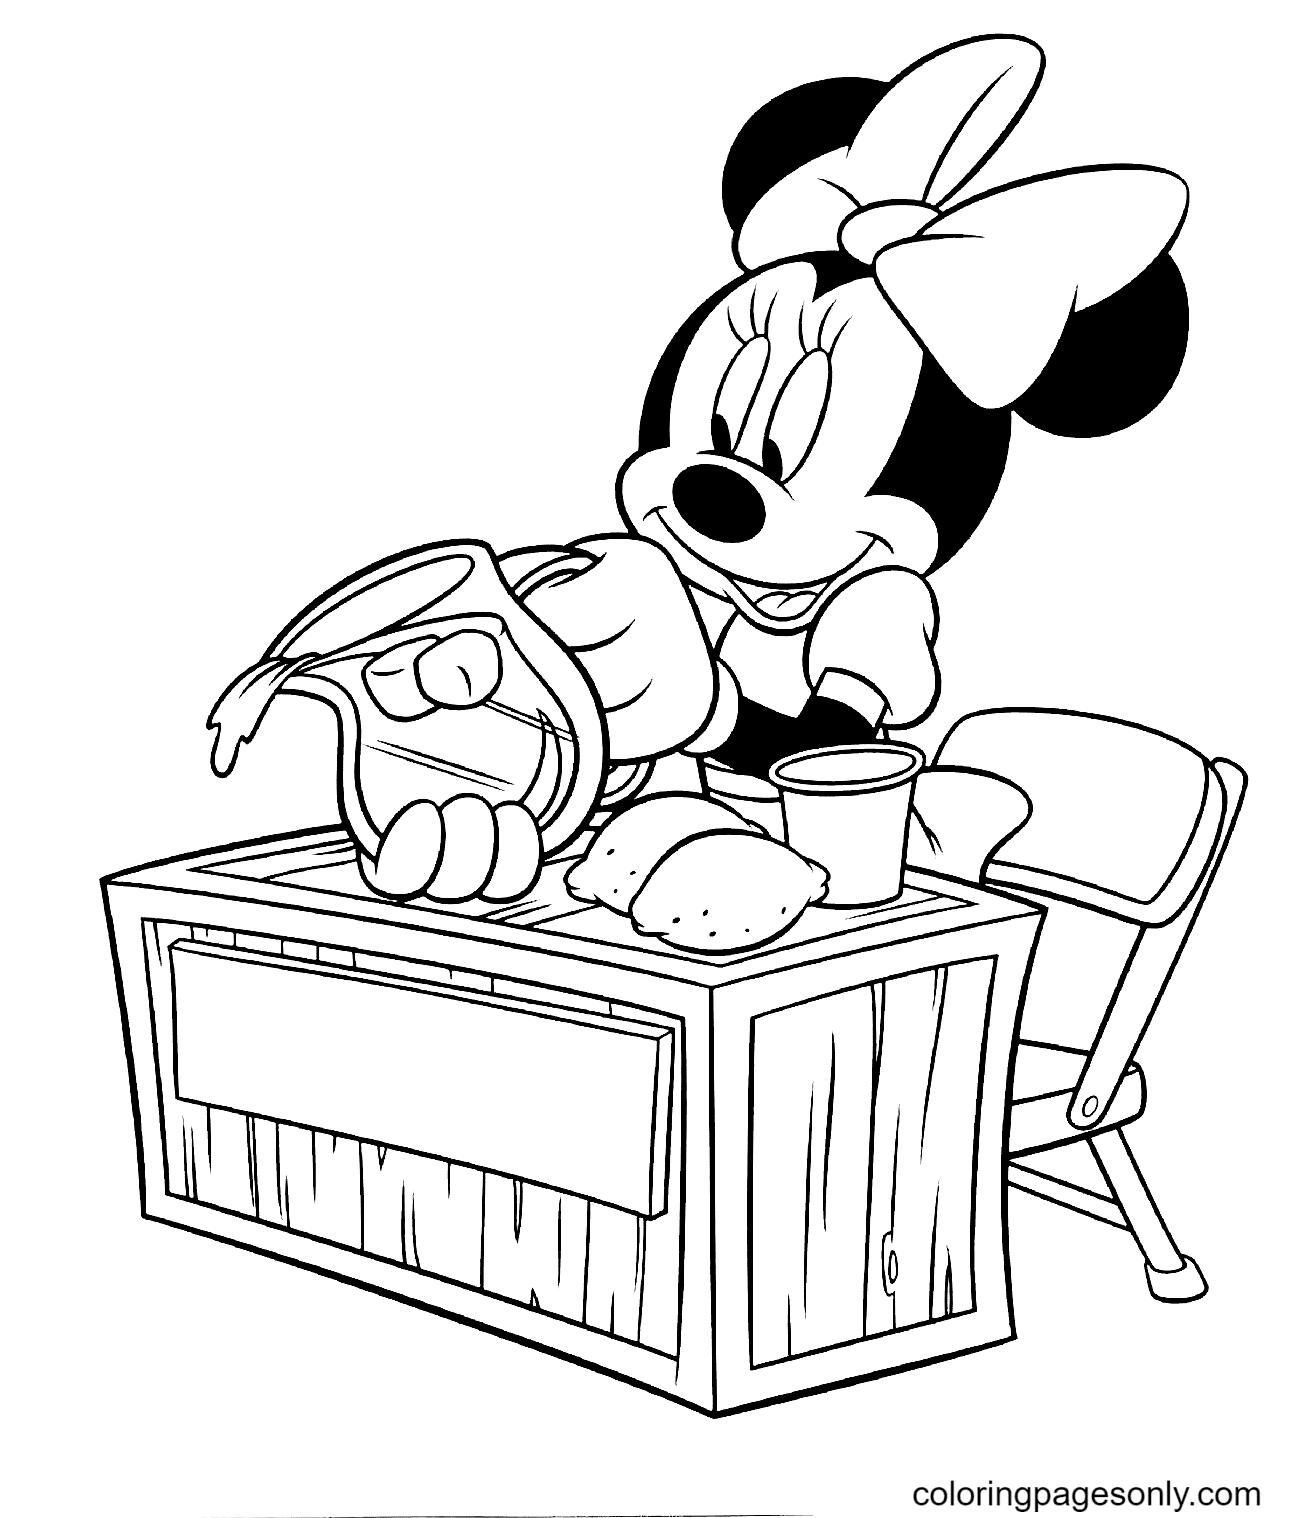 Minnie Is Making Lemon Syrop Coloring Pages